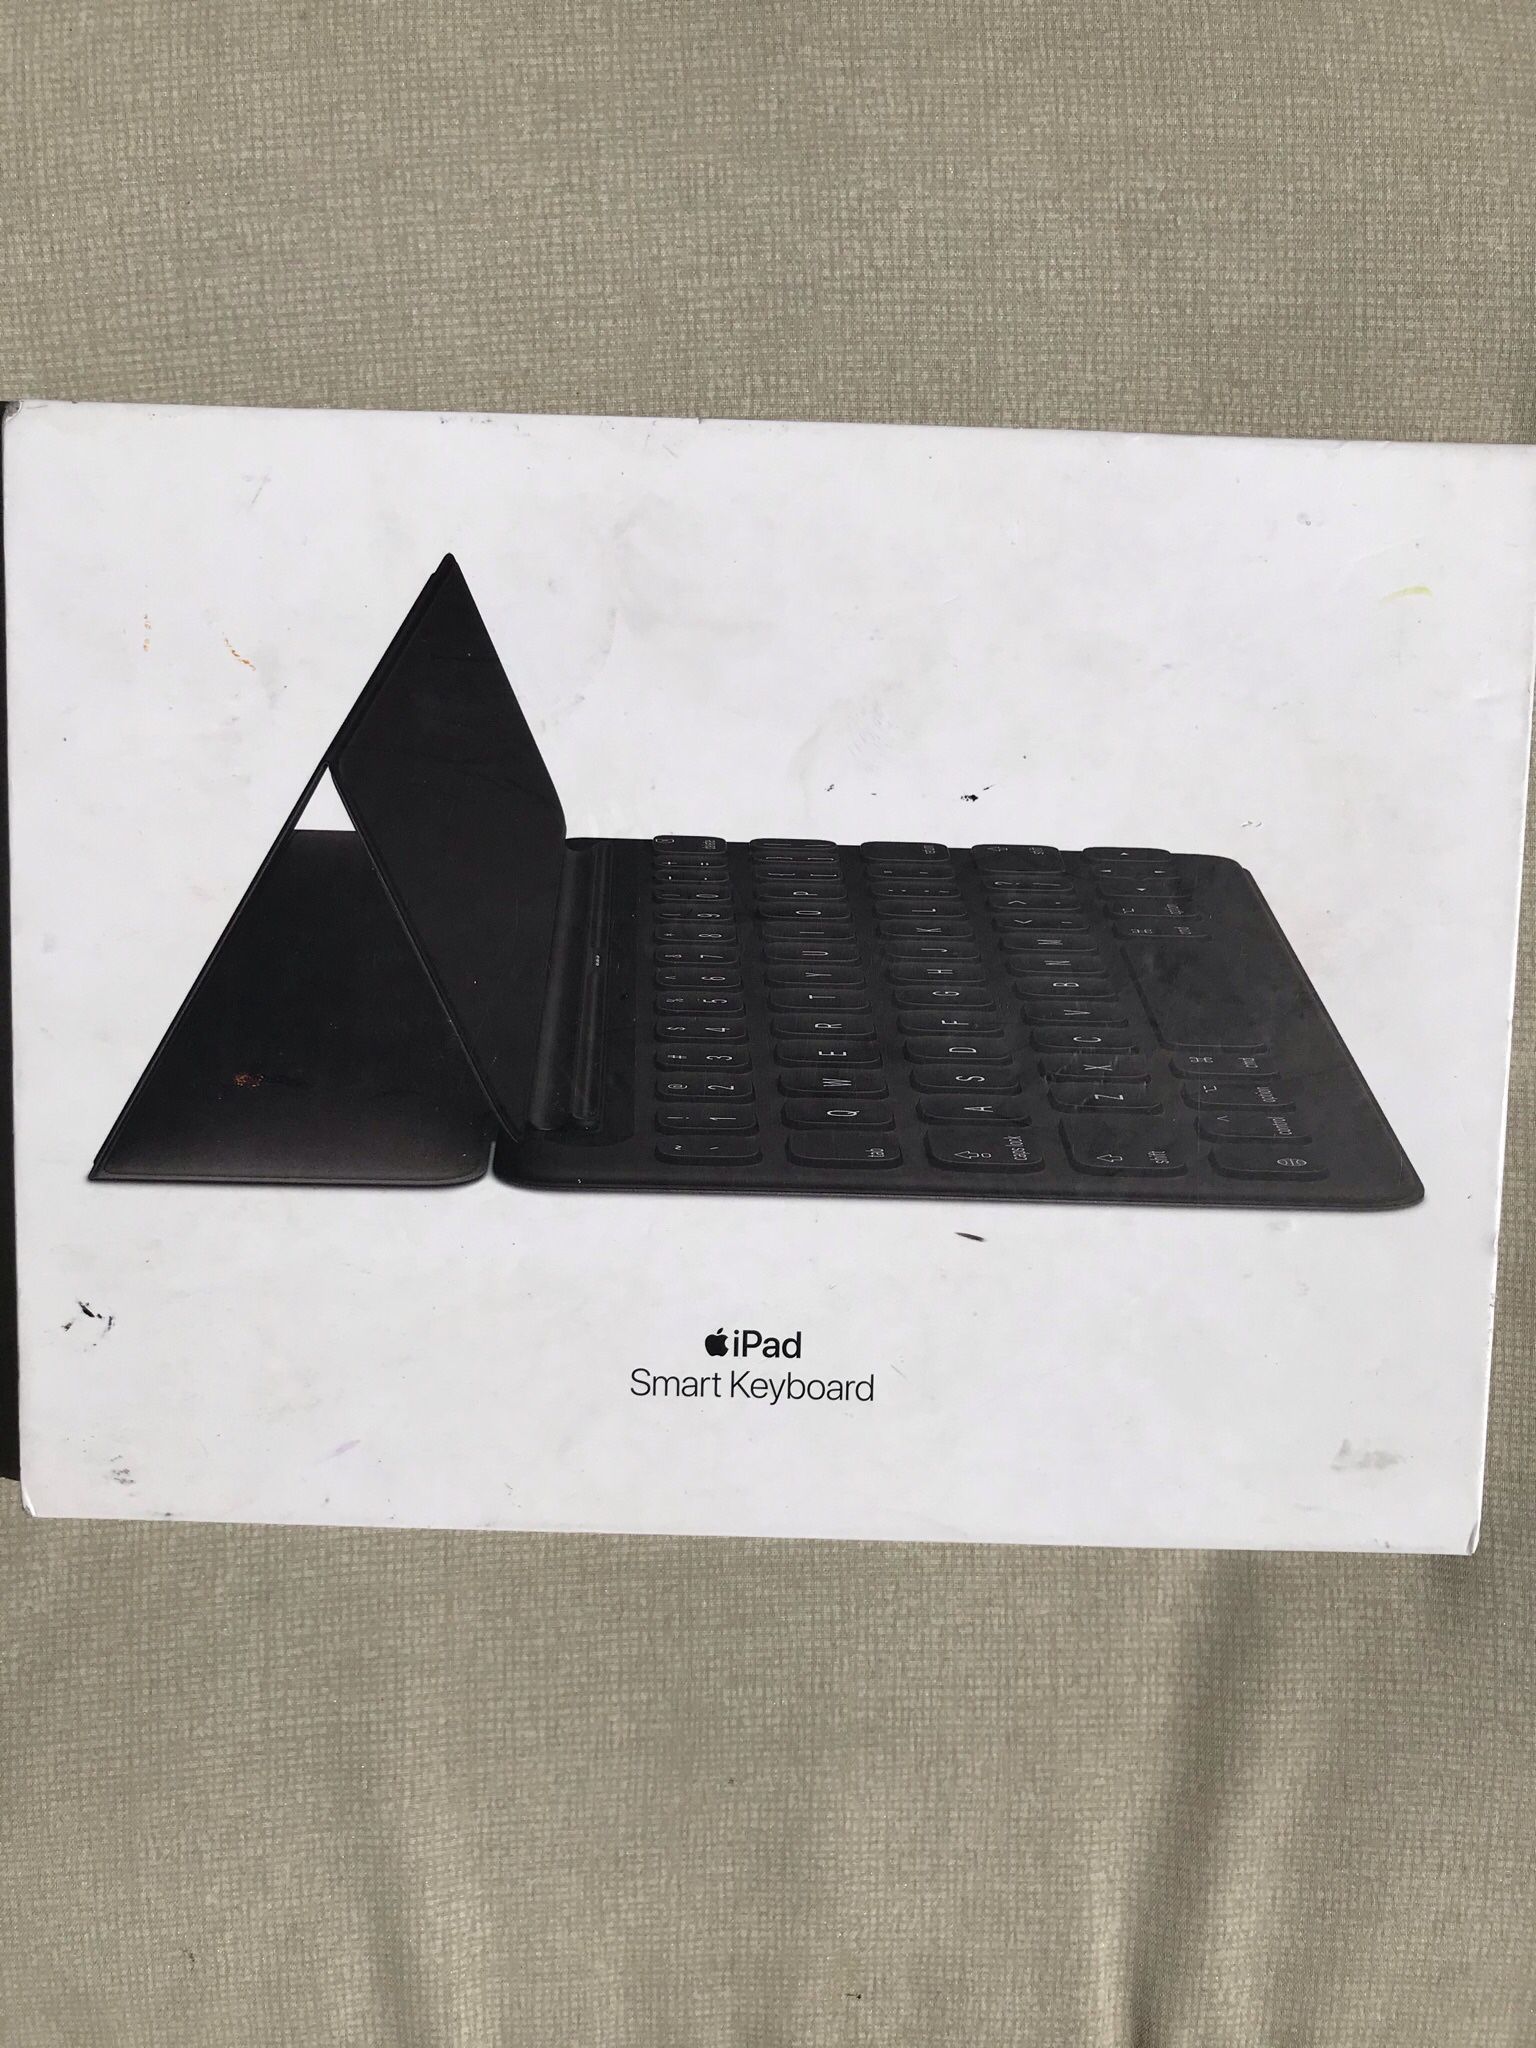 iPad Case And Keyboard 7th Gen 10.5 Inches